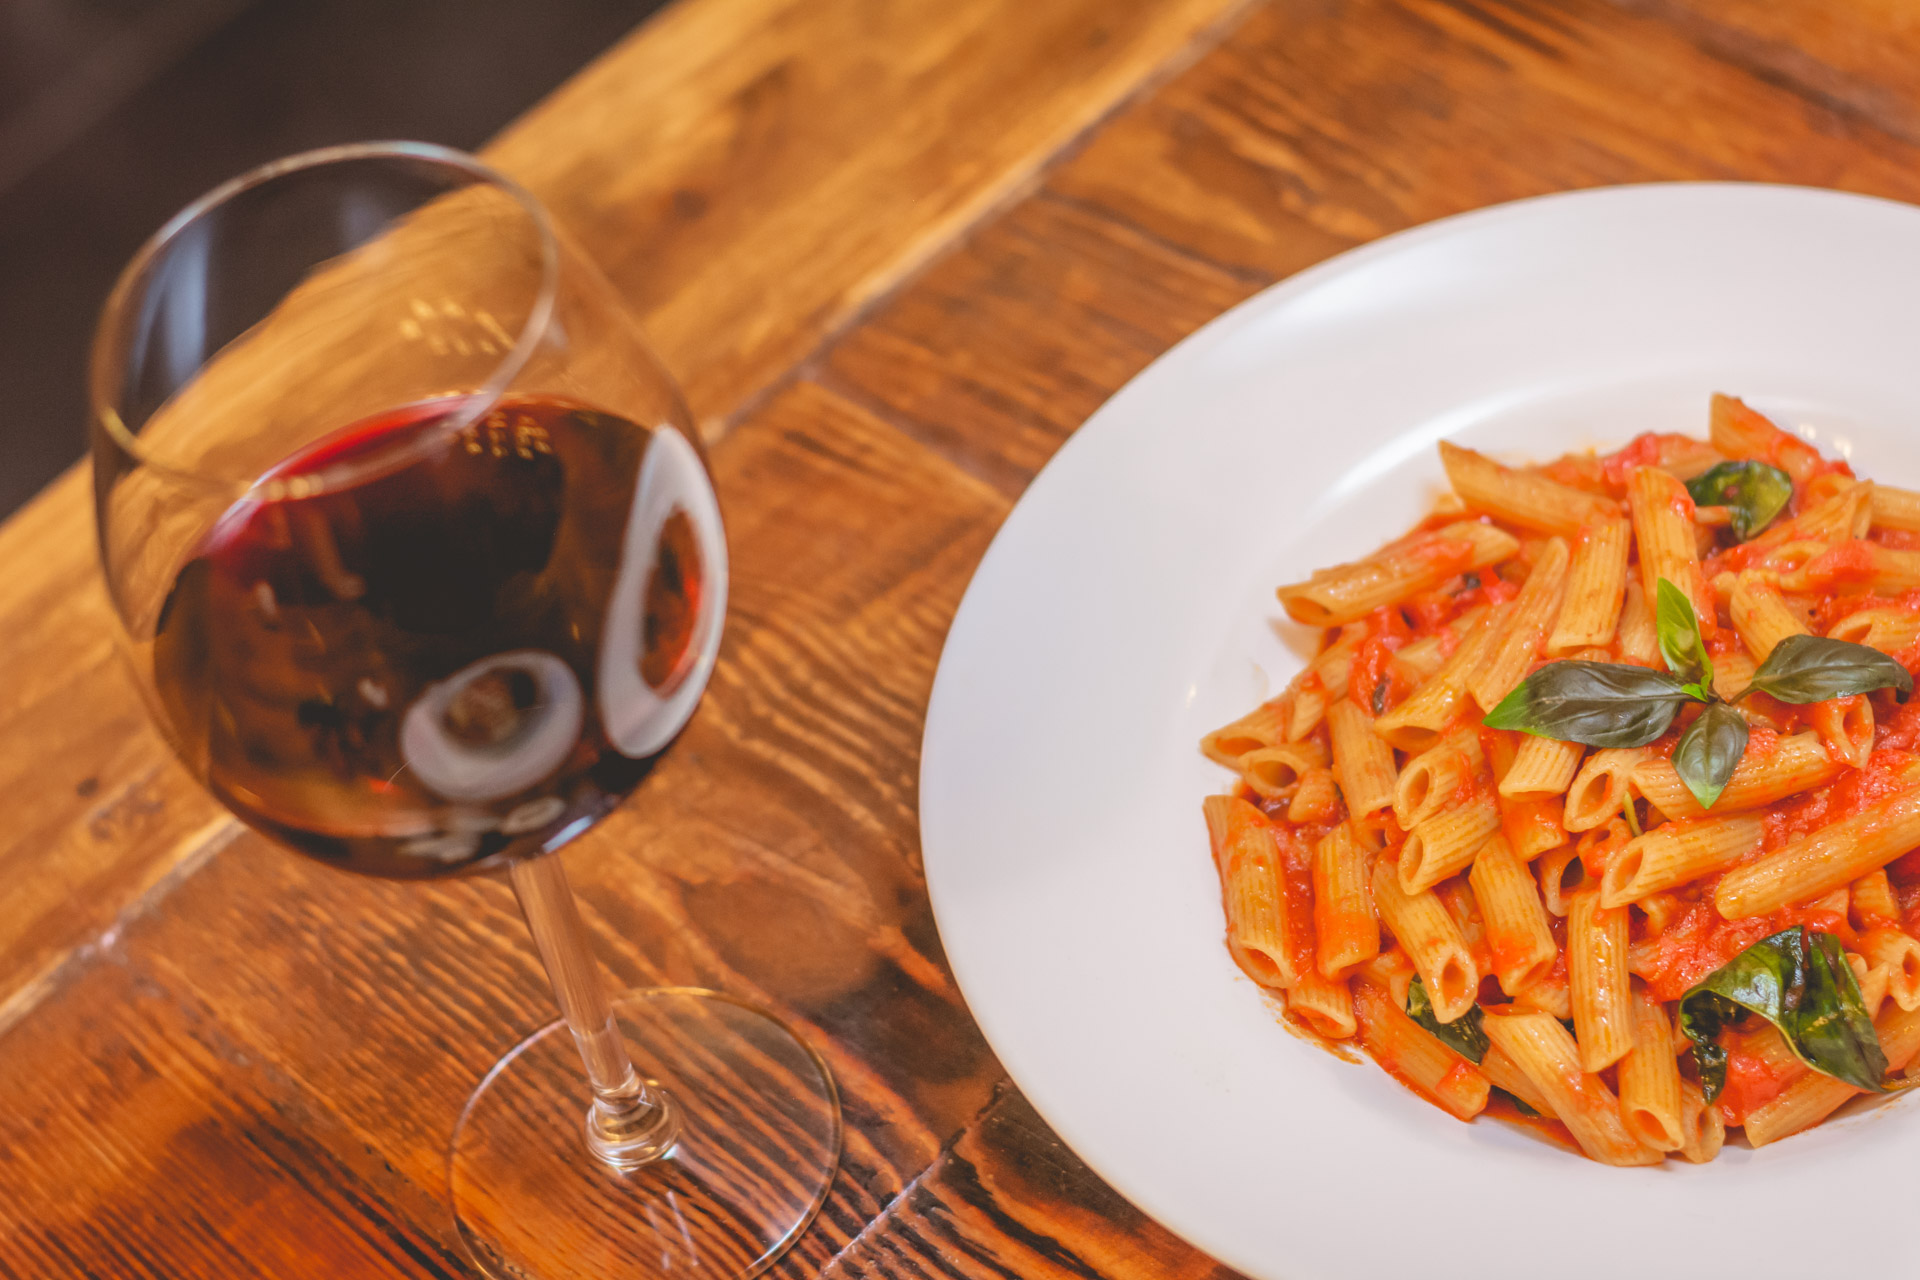 Pasta All'Arrabbiata with red wine